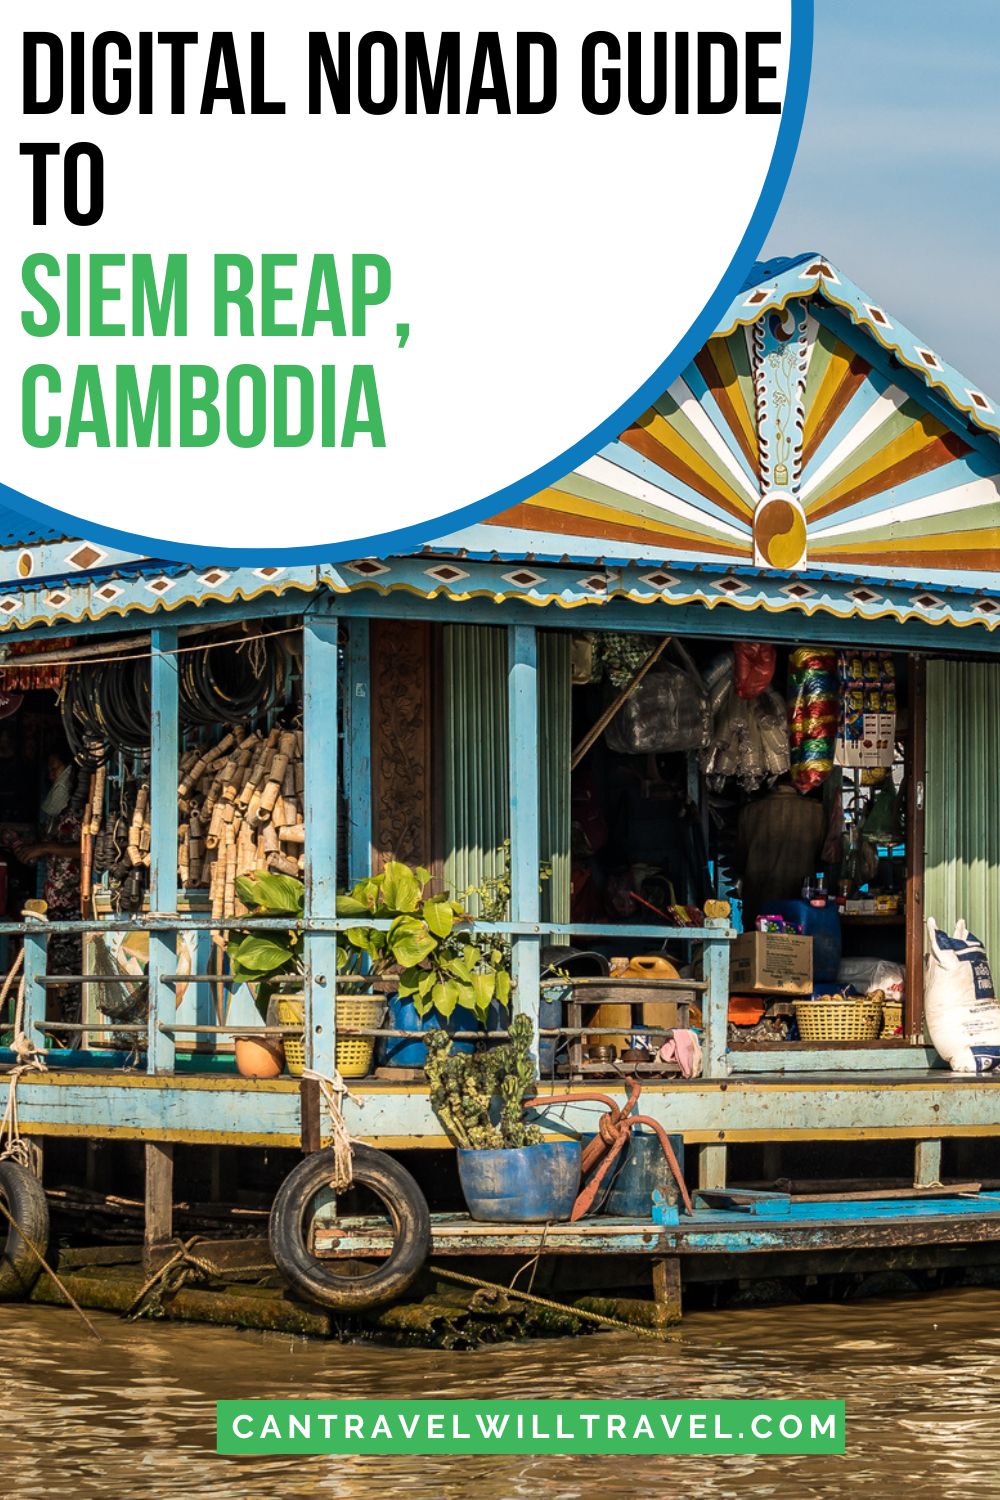 Digital Nomad Guide to Siem Reap, Cambodia